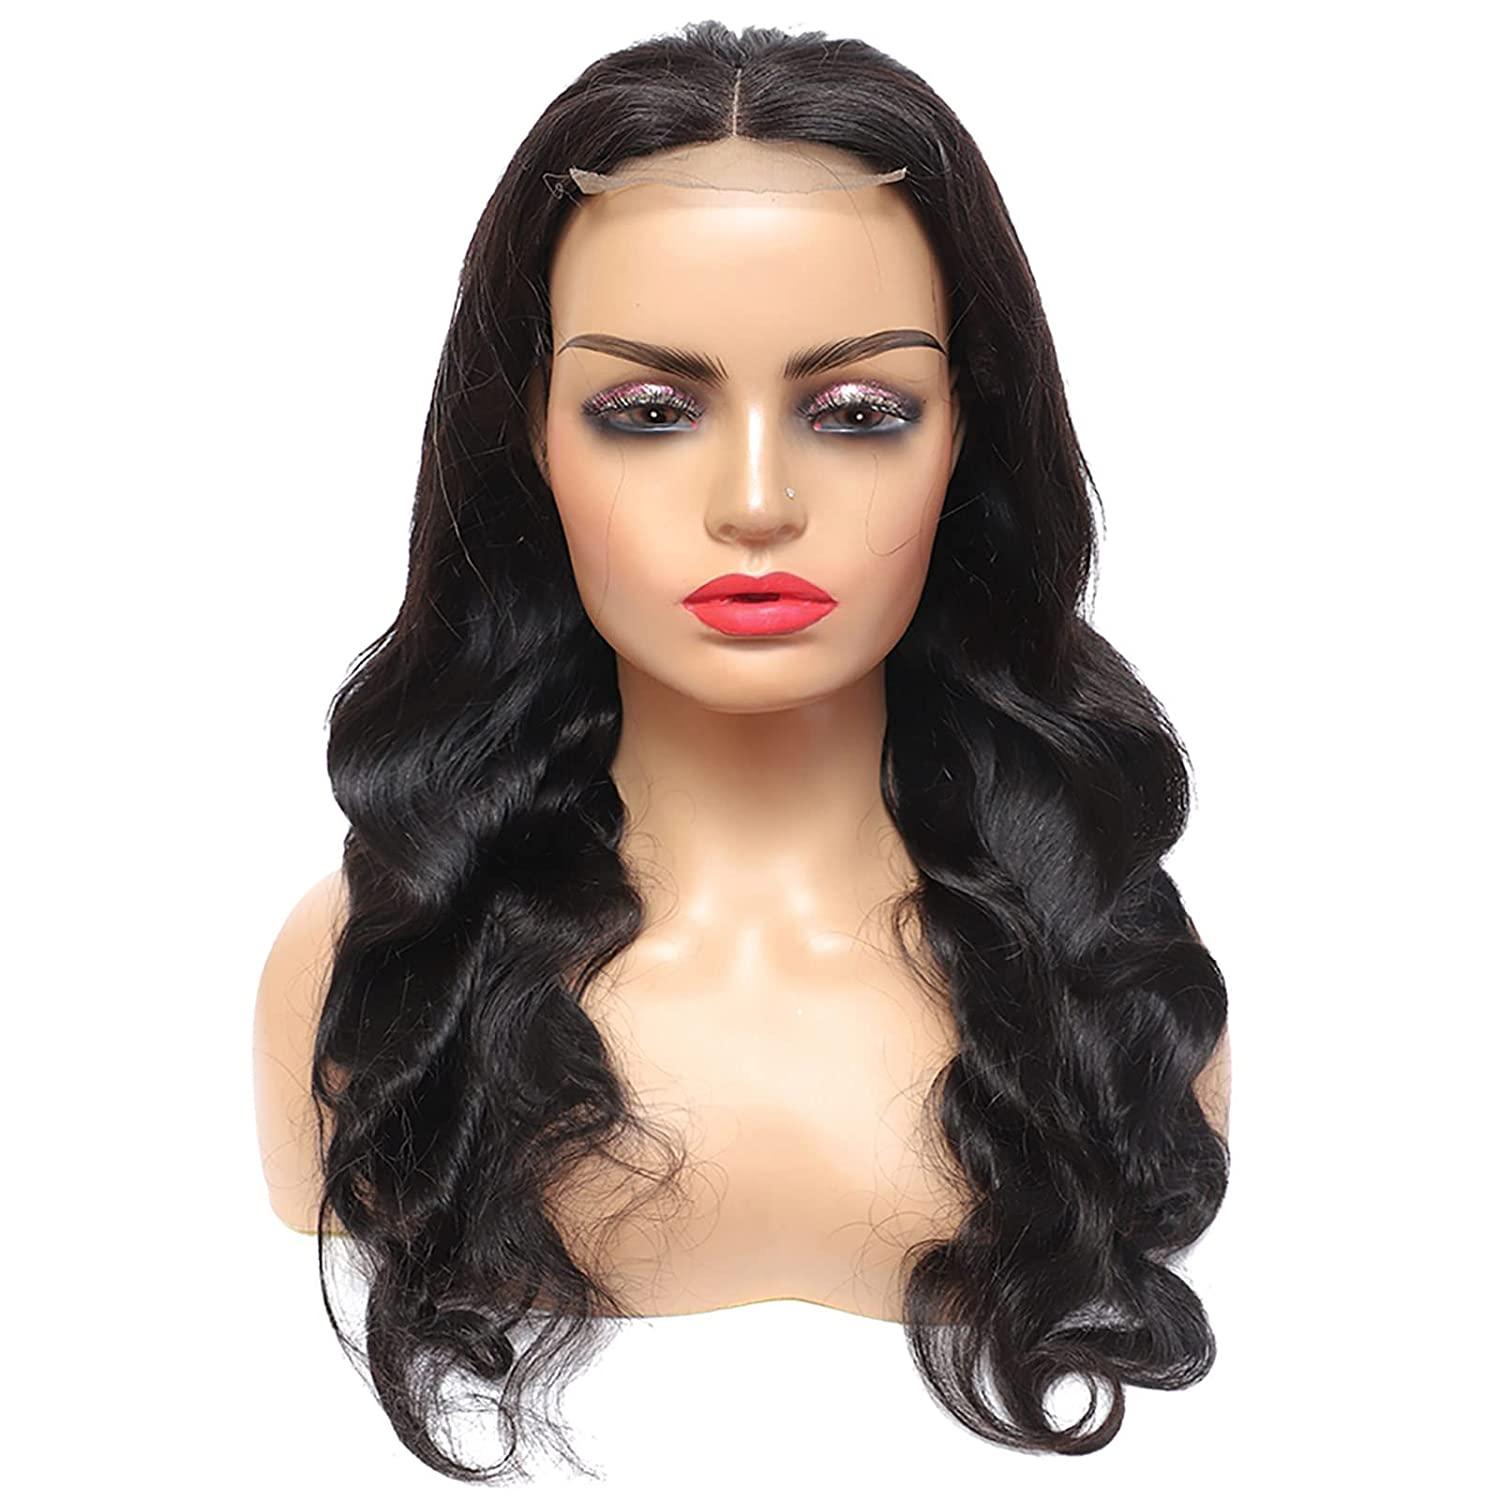 ZILING Lace Front Wigs Human Hair Body Wave 4x4 Lace Closure Wigs